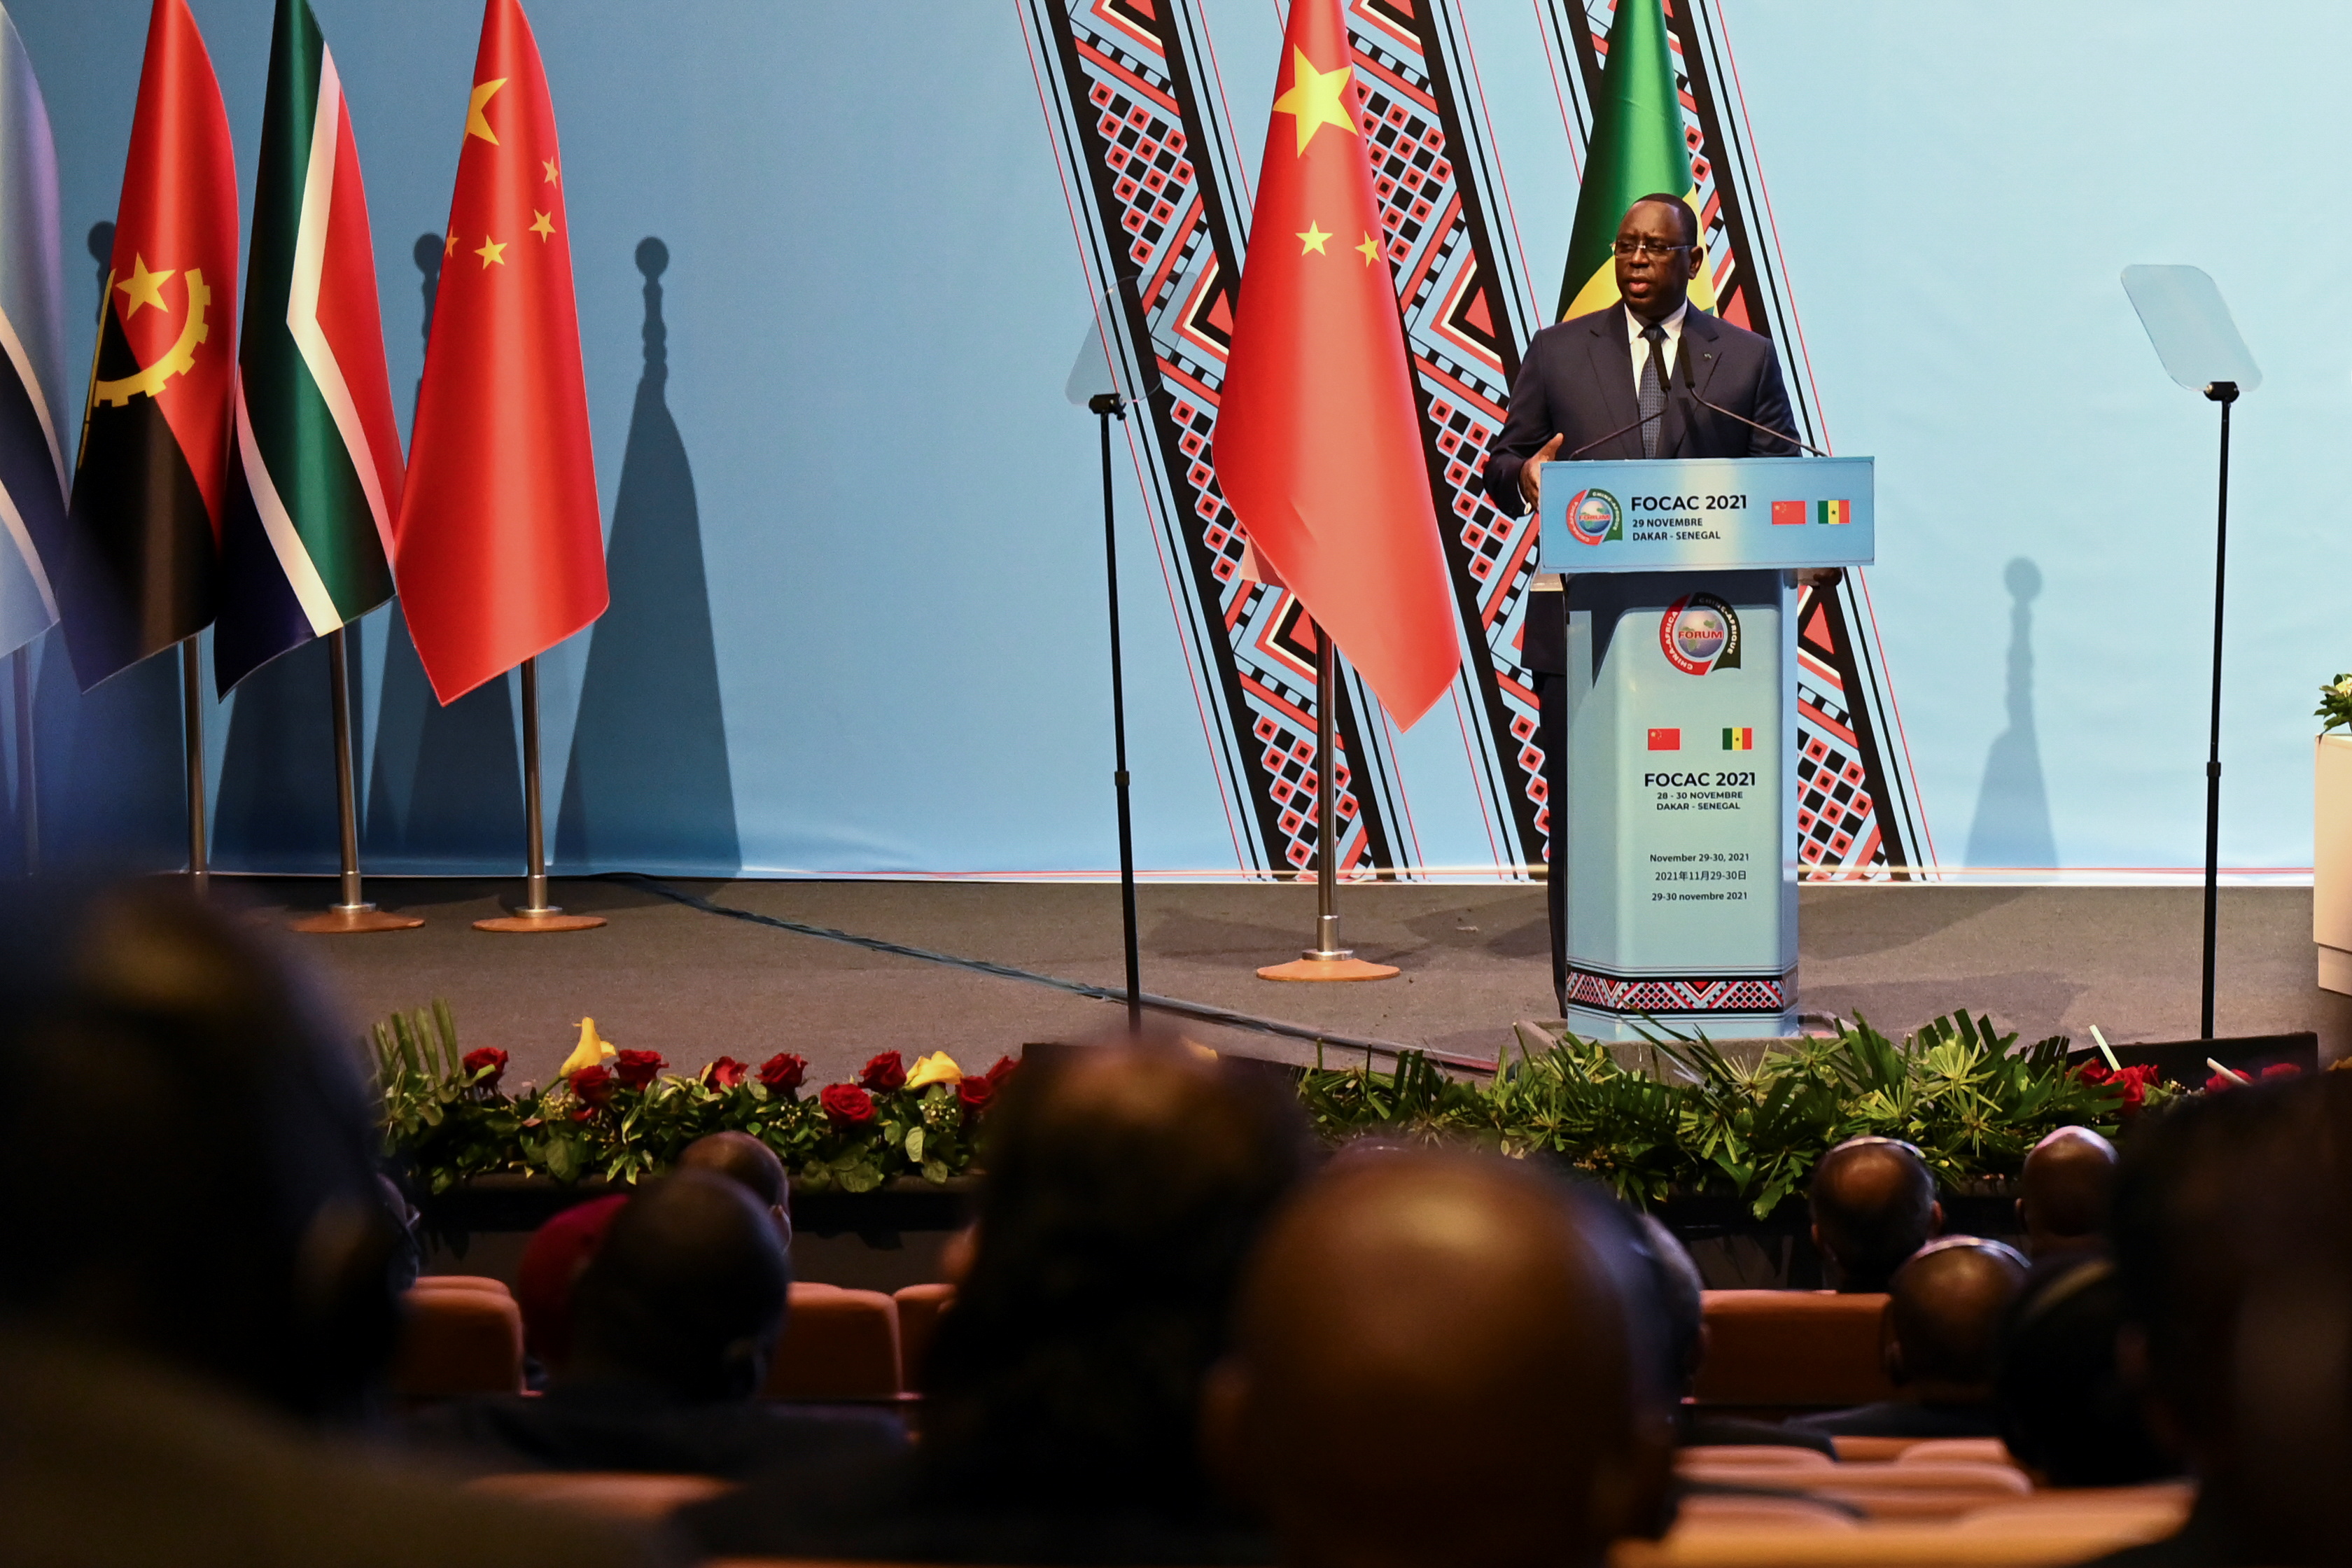 Senegal's President Macky Sall speaks during  the opening of the Forum on China-Africa Cooperation, (FOCAC) in Dakar, Senegal November 29, 2021. REUTERS/Cooper Inveen